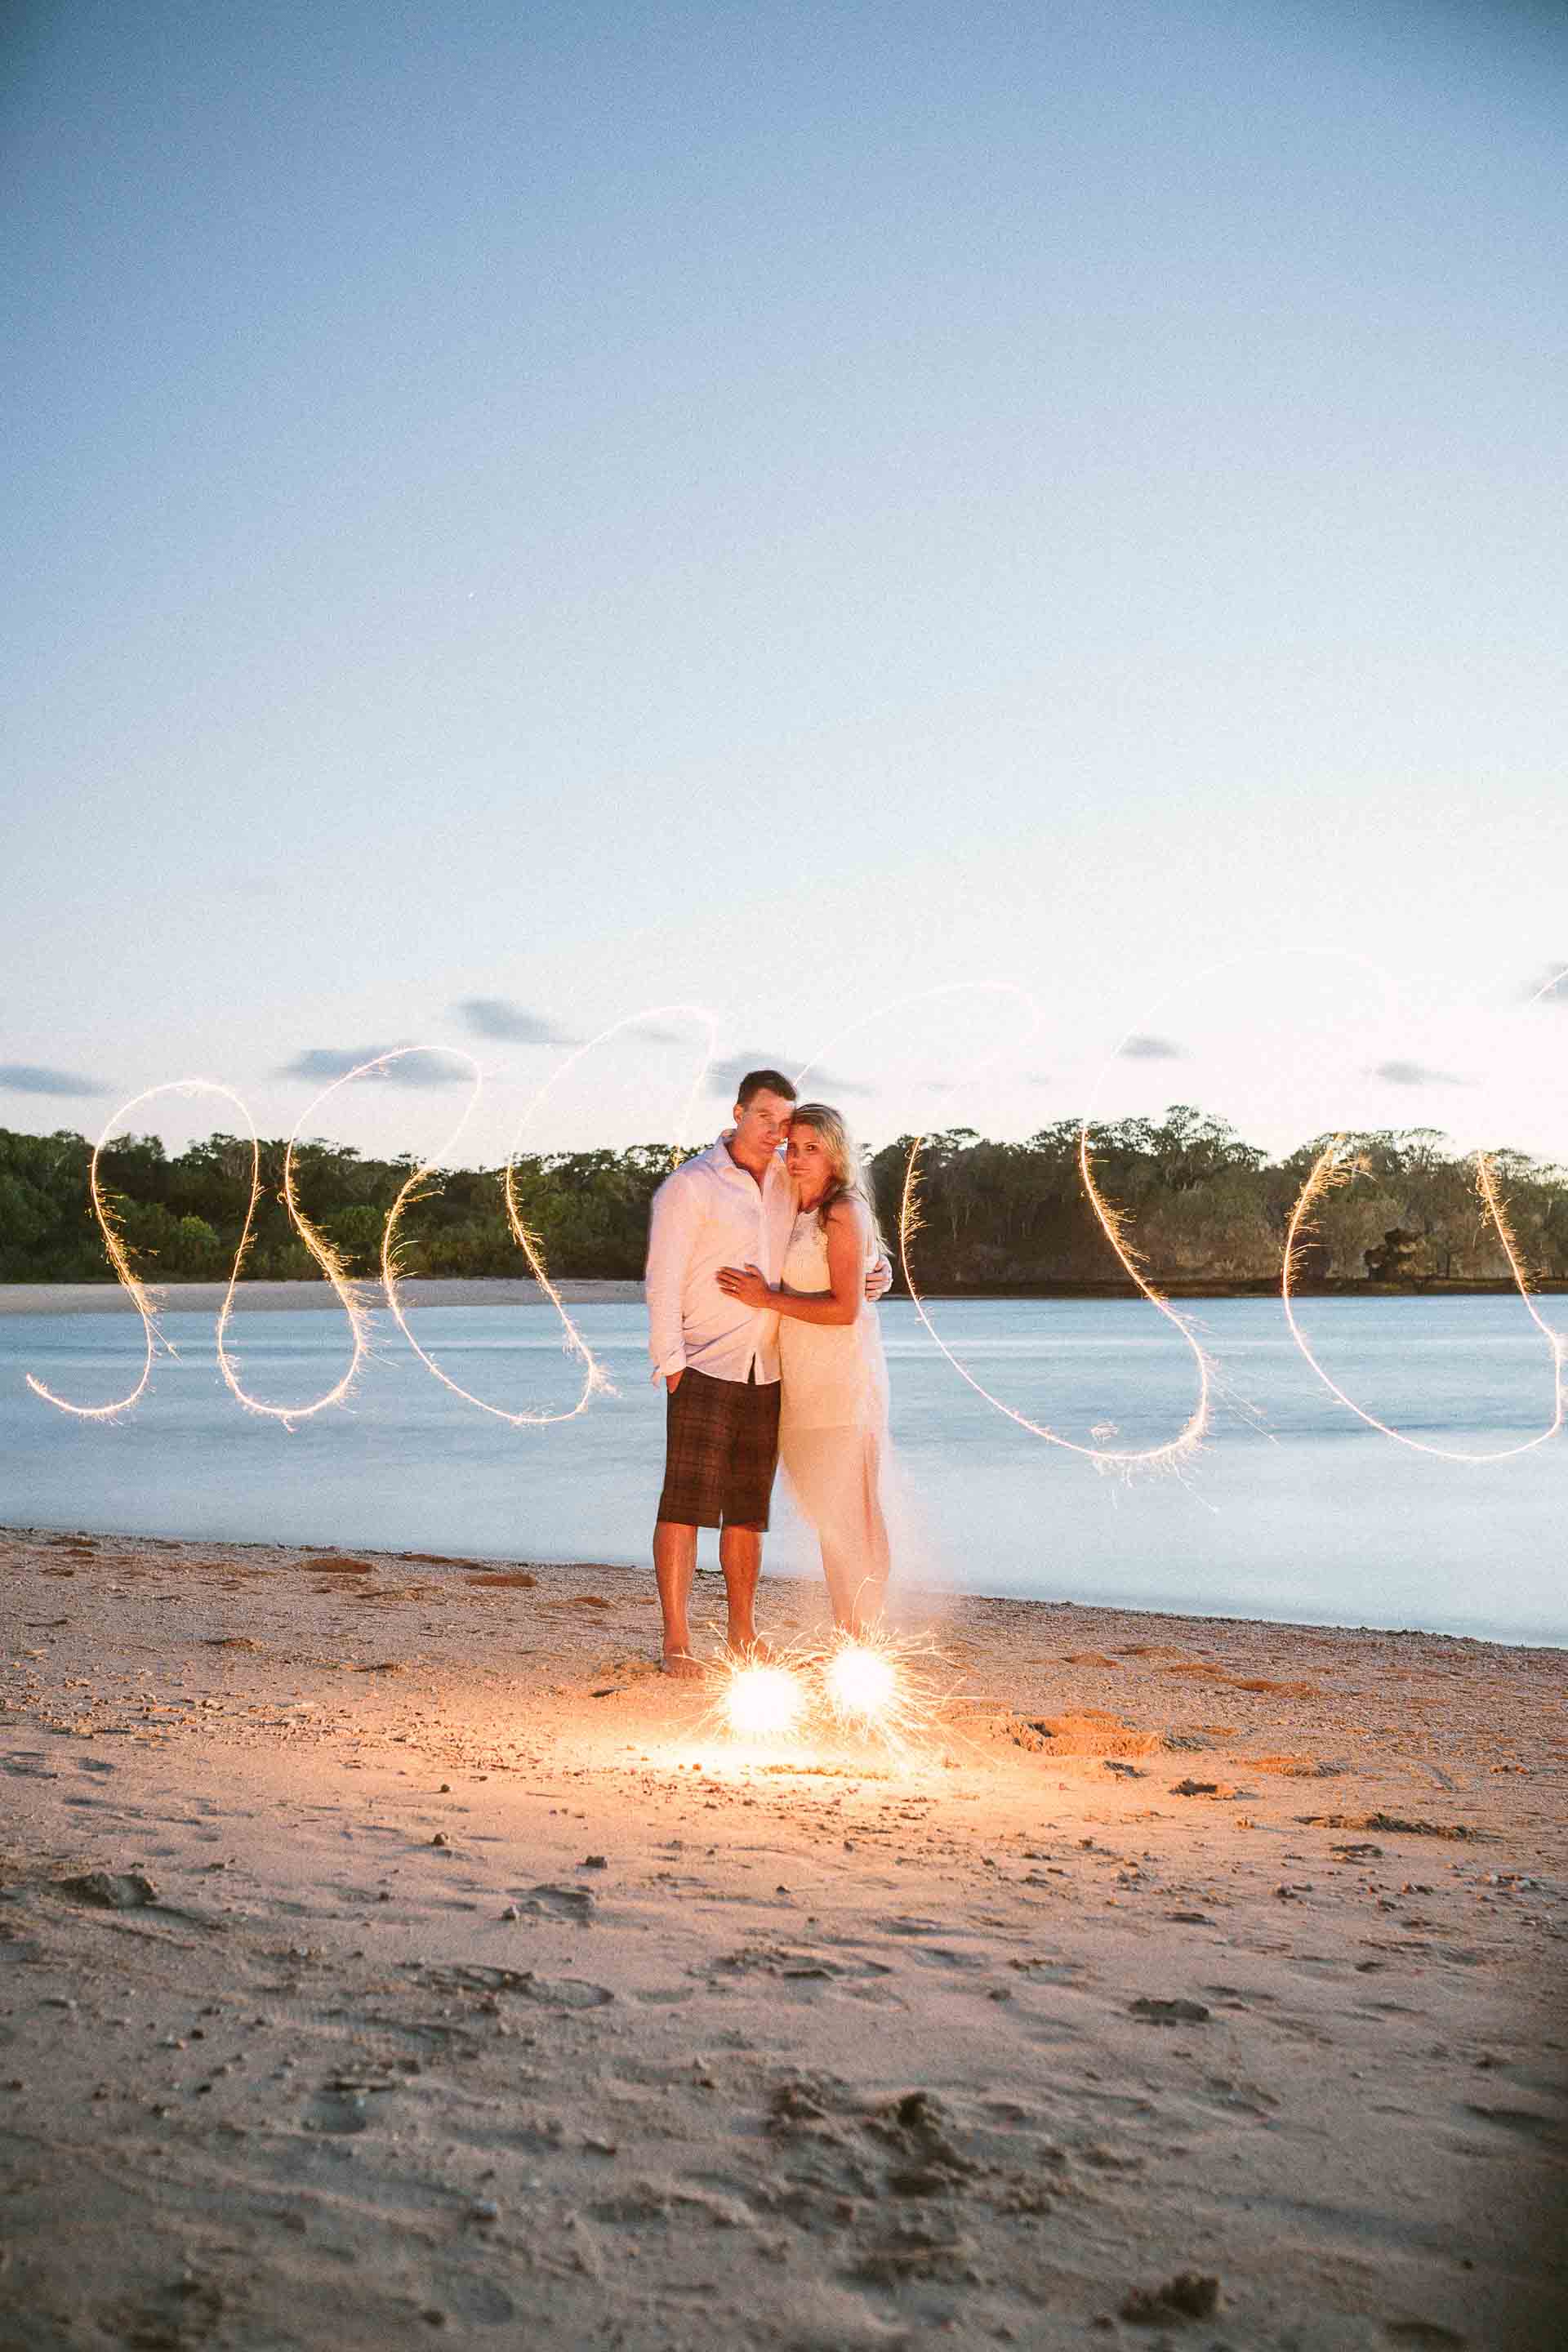 the couple standing on the beach light by sparklers